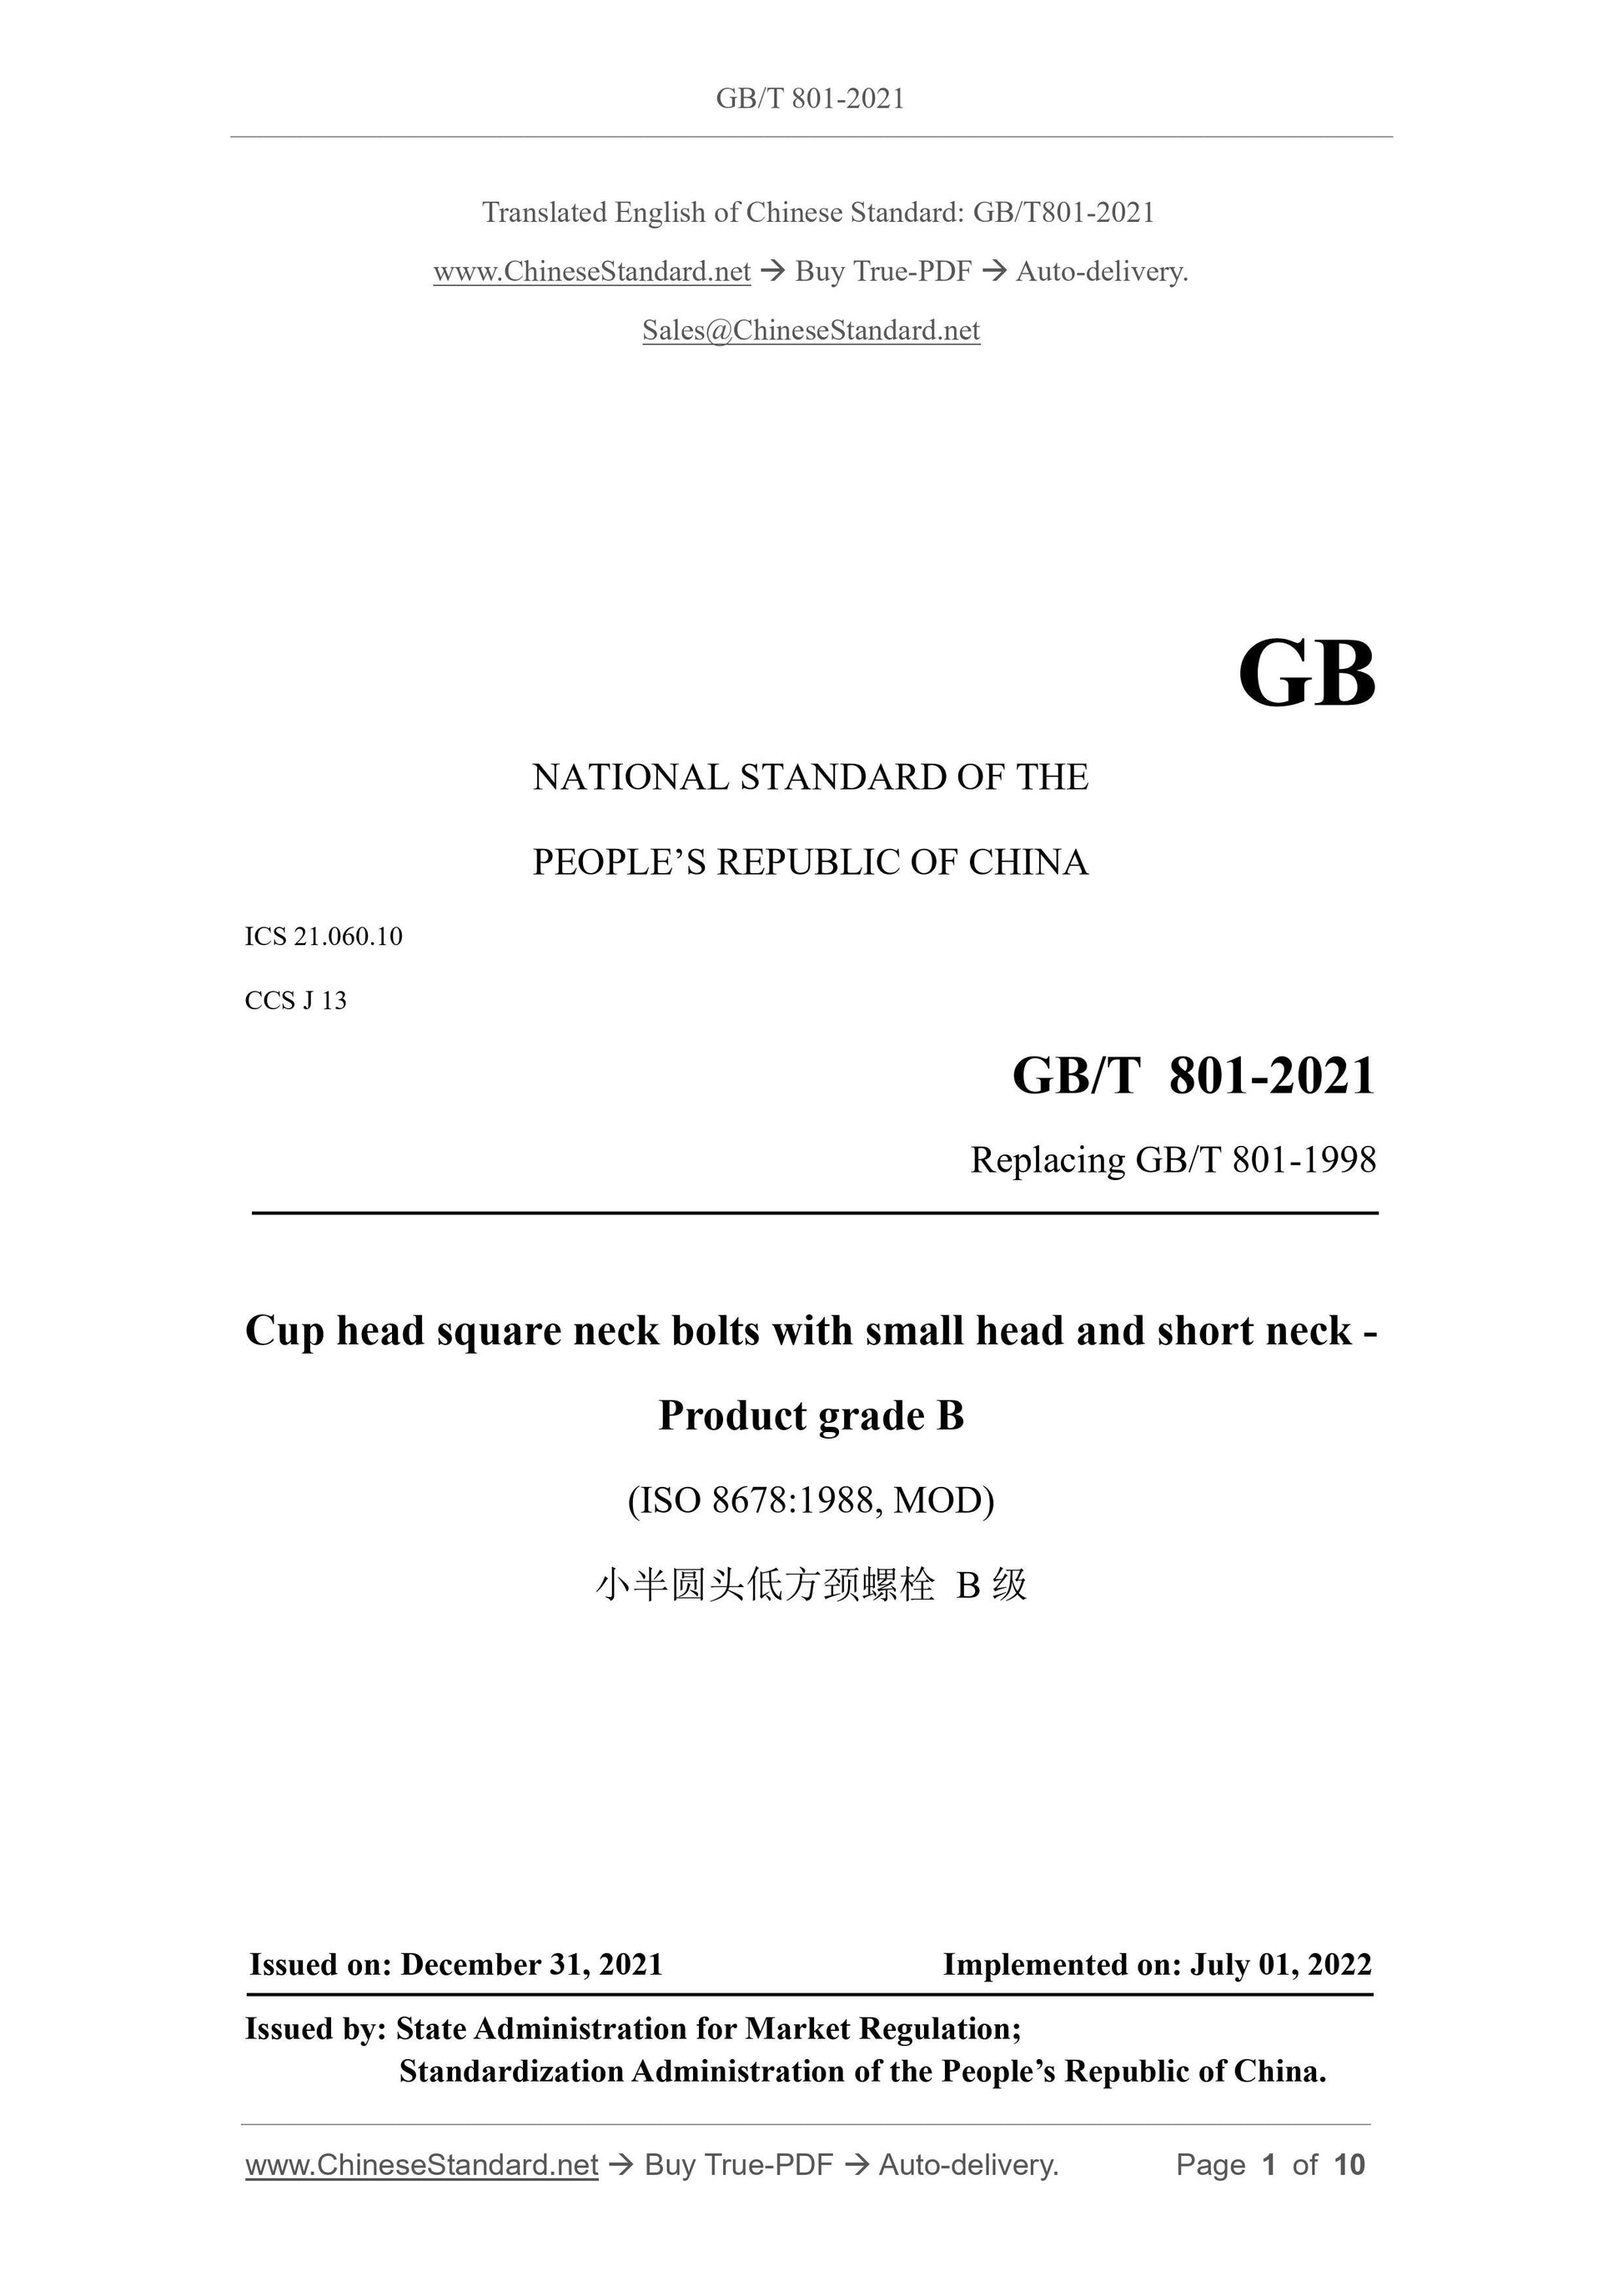 GB/T 801-2021 Page 1